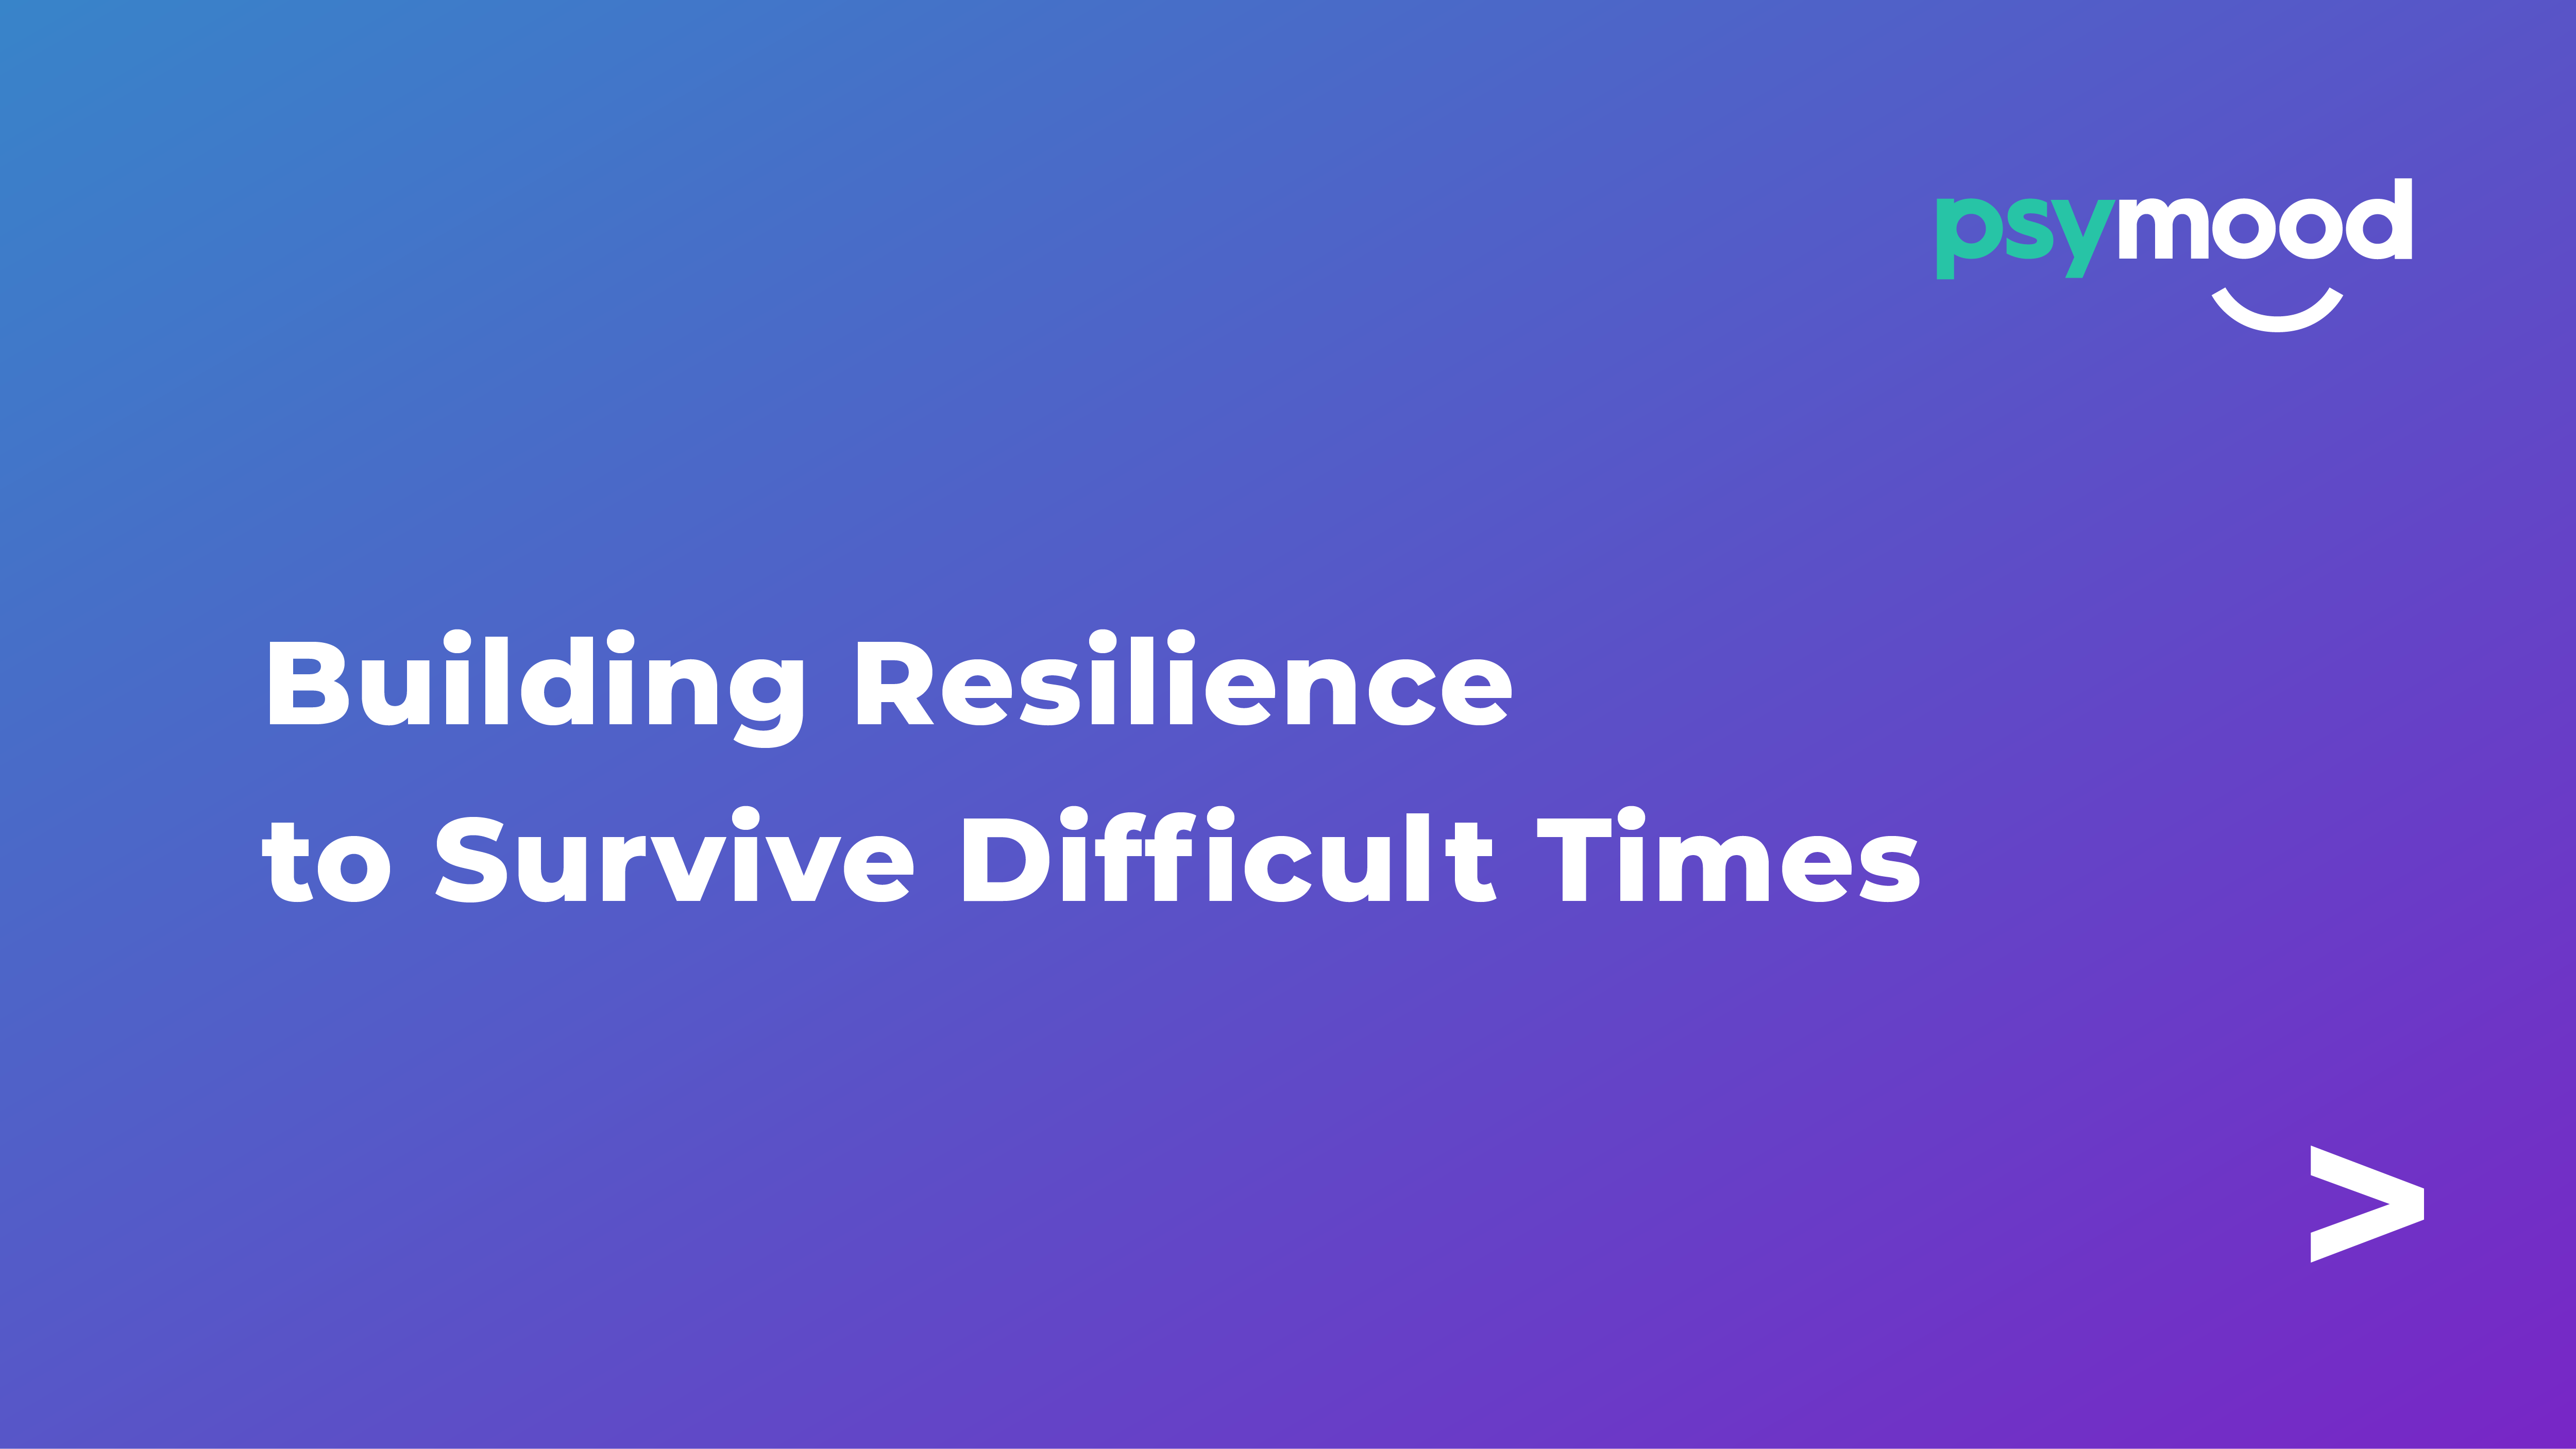 Building Resilience to Survive Difficult Times